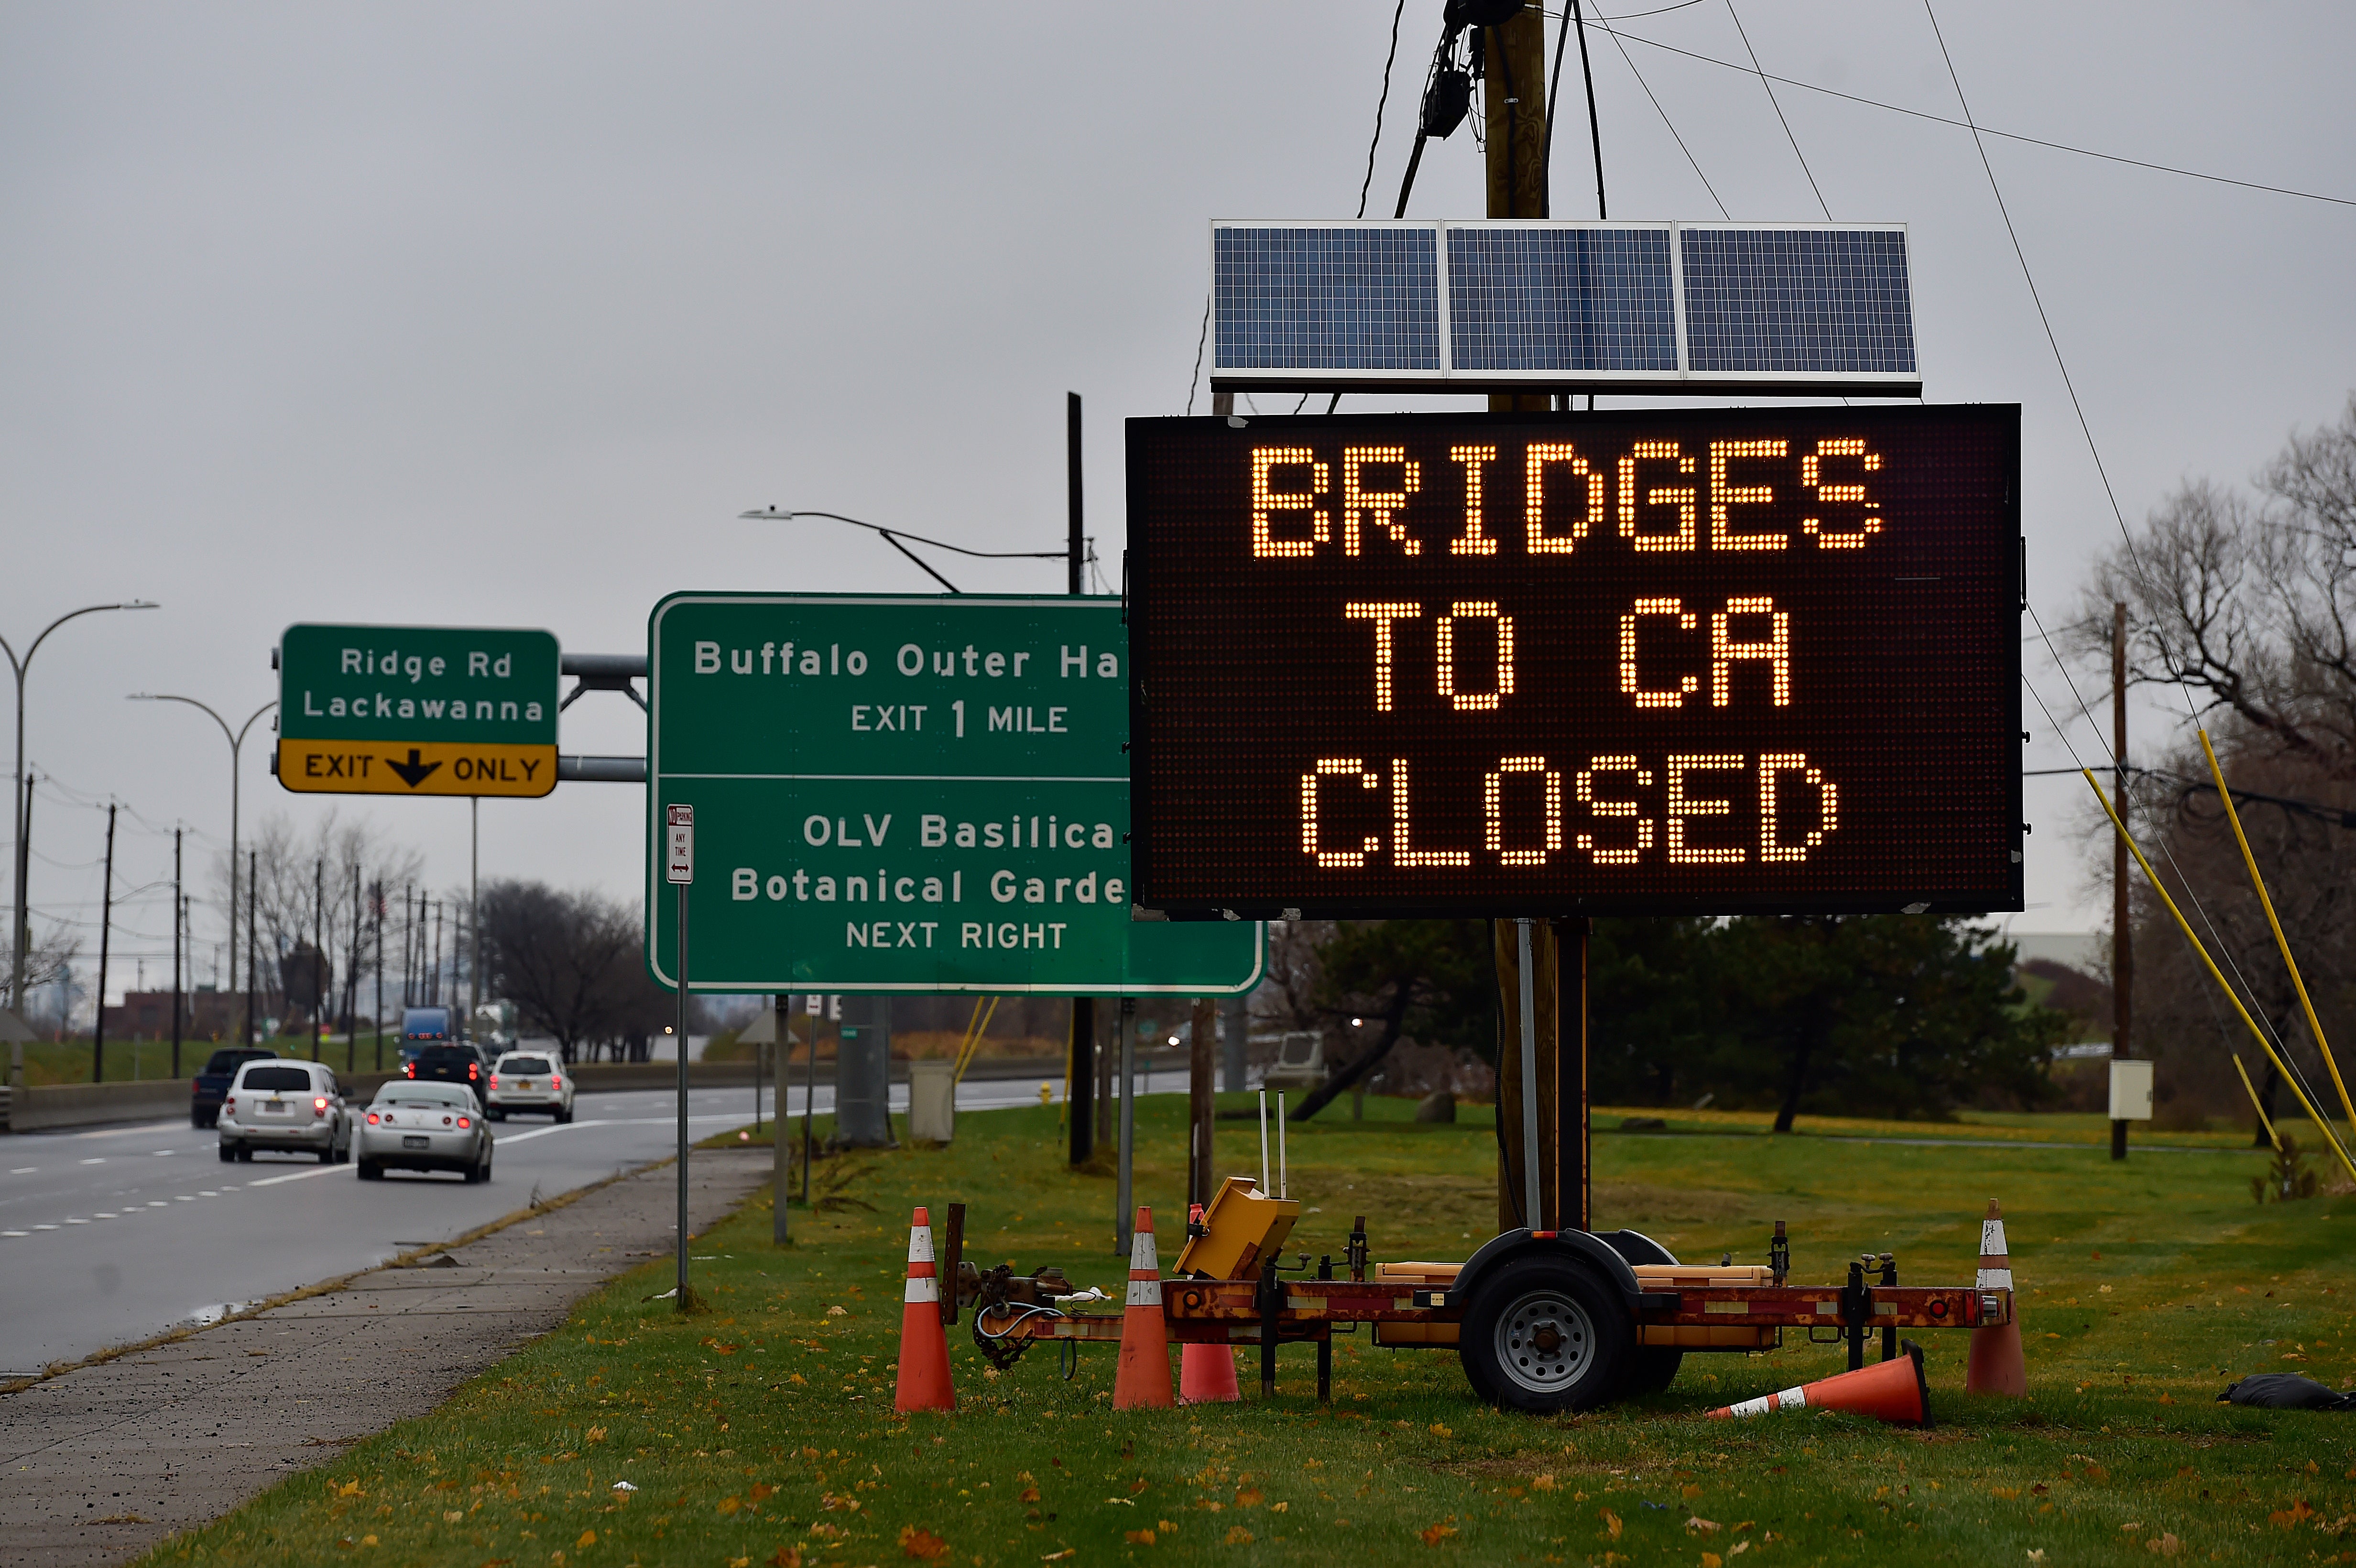 All bridges between New York state and Canada were closed after the explosion. Three were reopened hours later